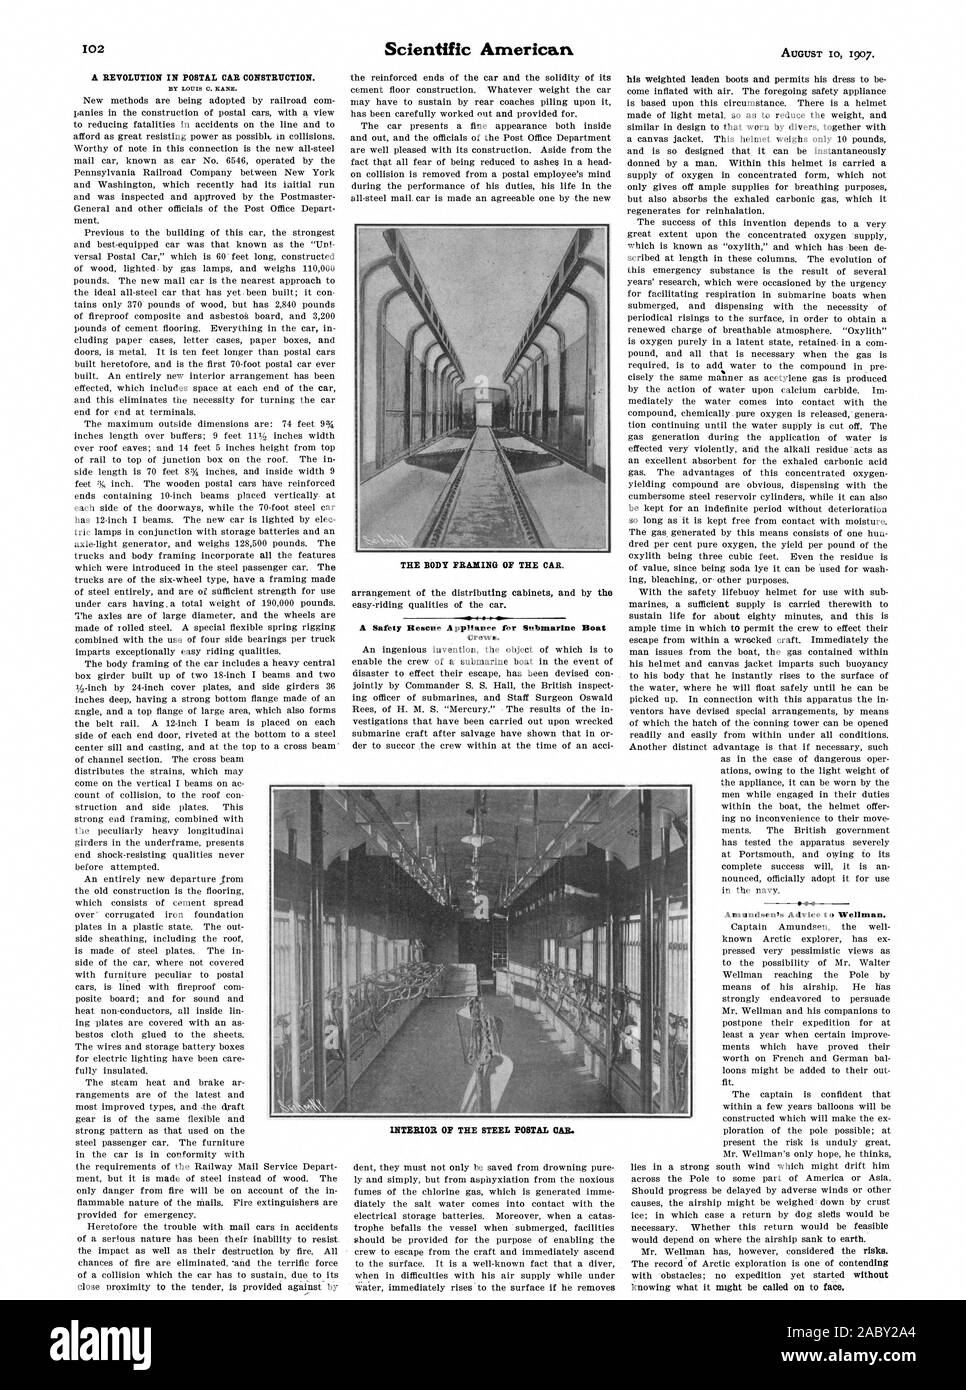 BY LOUIS C. RAE. THE BODY FRAMING OF THE CAR. M I S40. A Safety Rescue Appliance for Submarine Boat Crews. I AmundeenNo Advice to Wellman., scientific american, 1907-08-10 Stock Photo